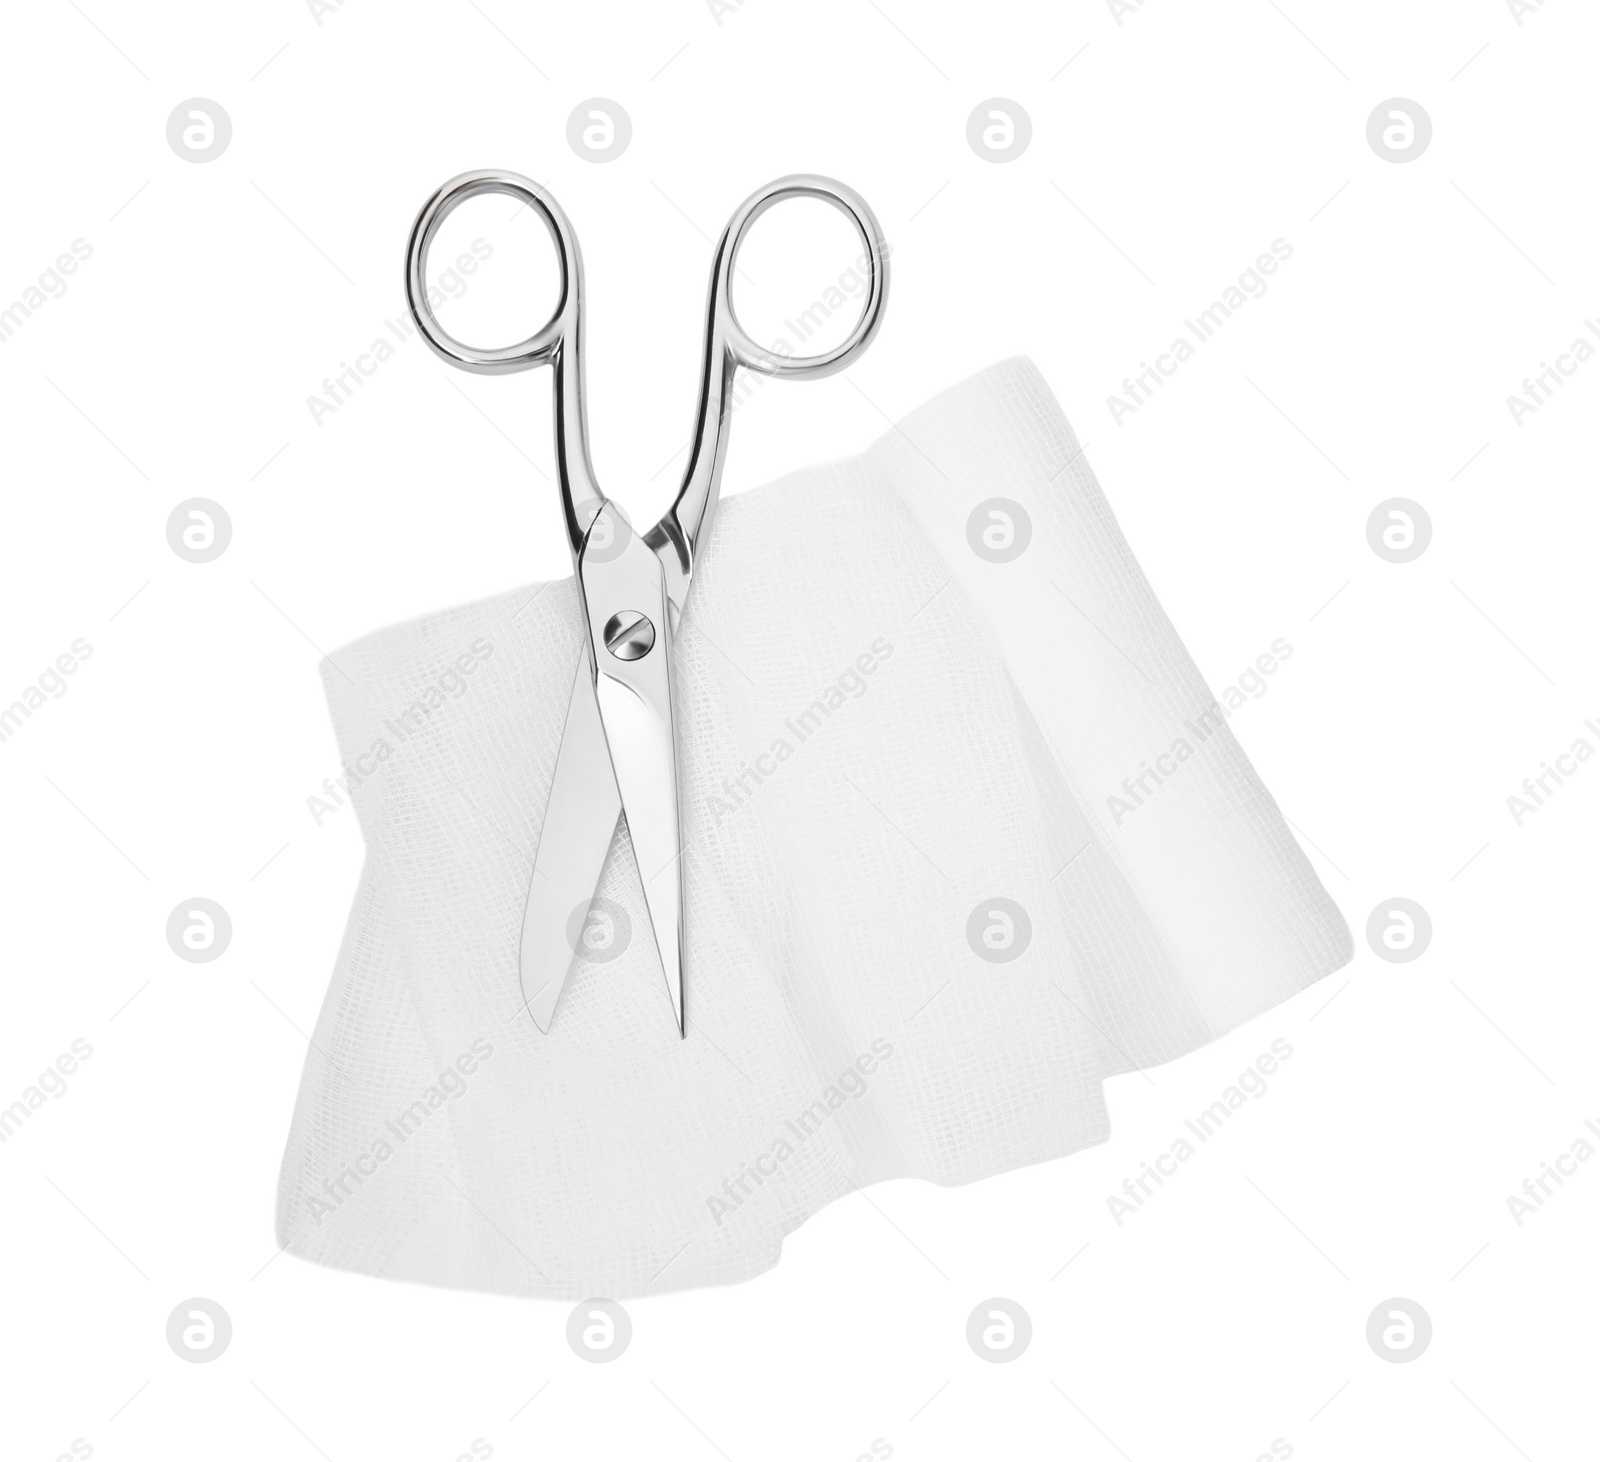 Photo of Medical bandage and scissors on white background, top view